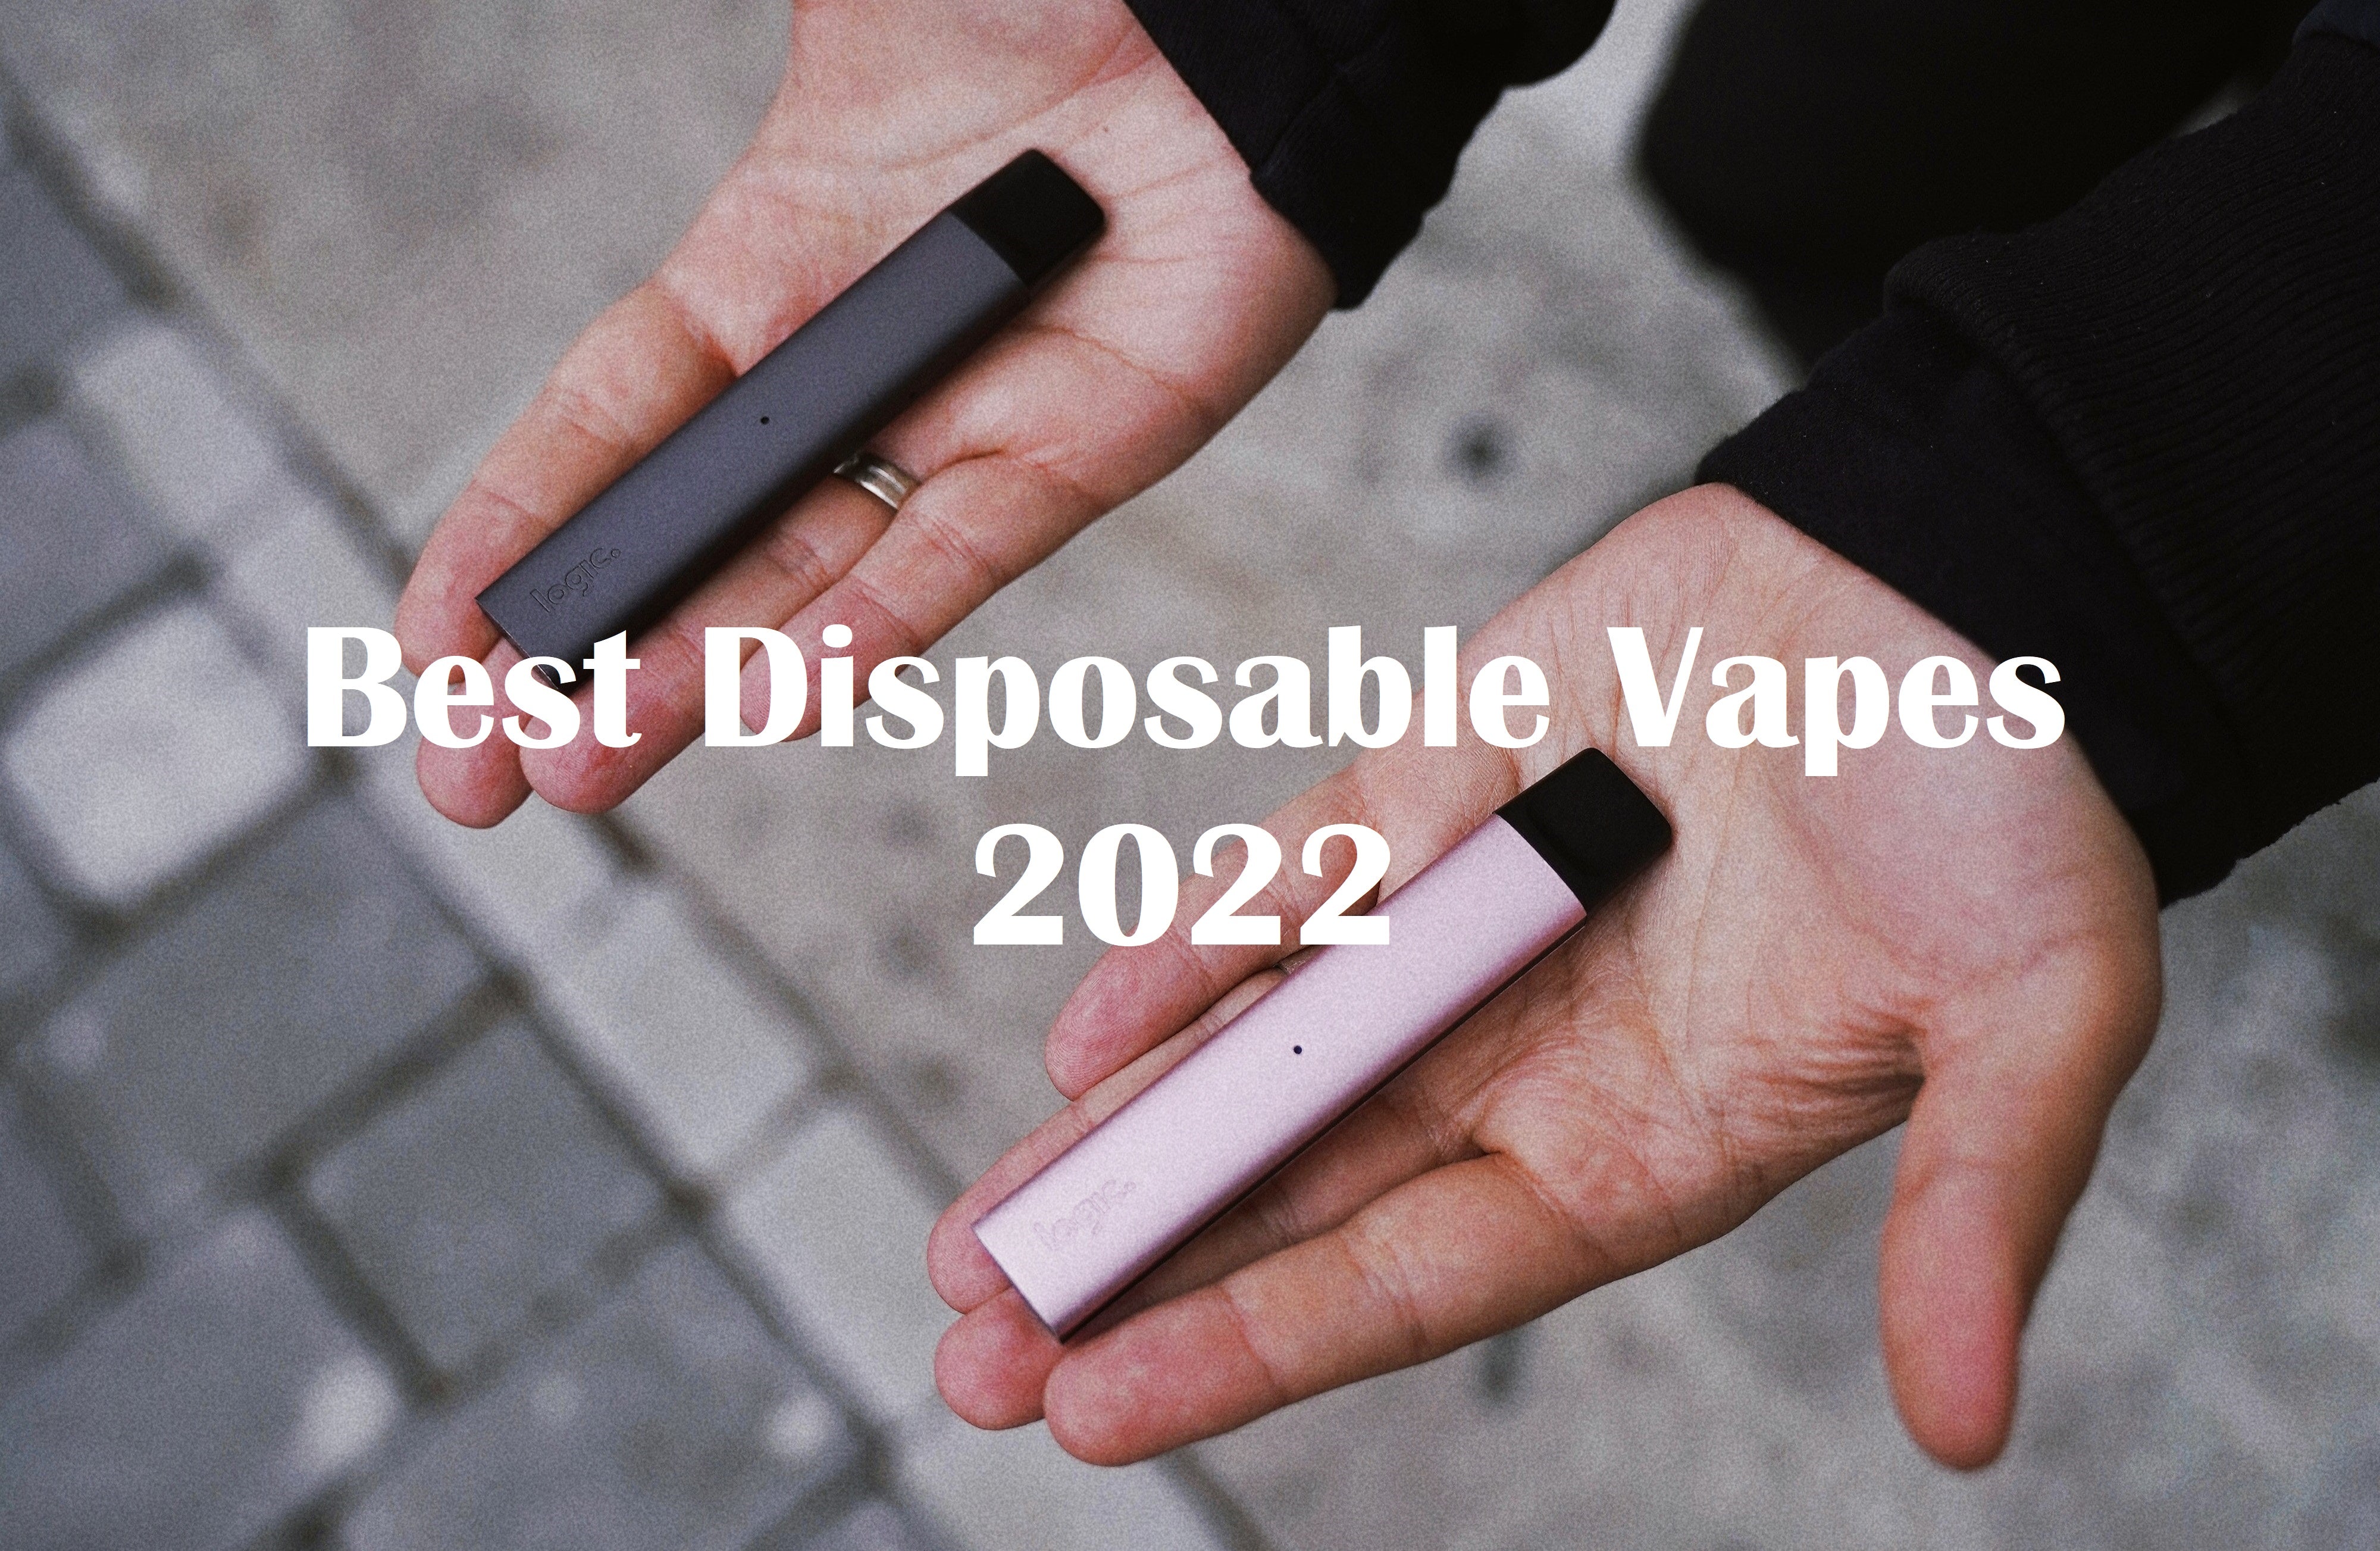 The 3 best Disposable Vapes You Could Purchase In 2022